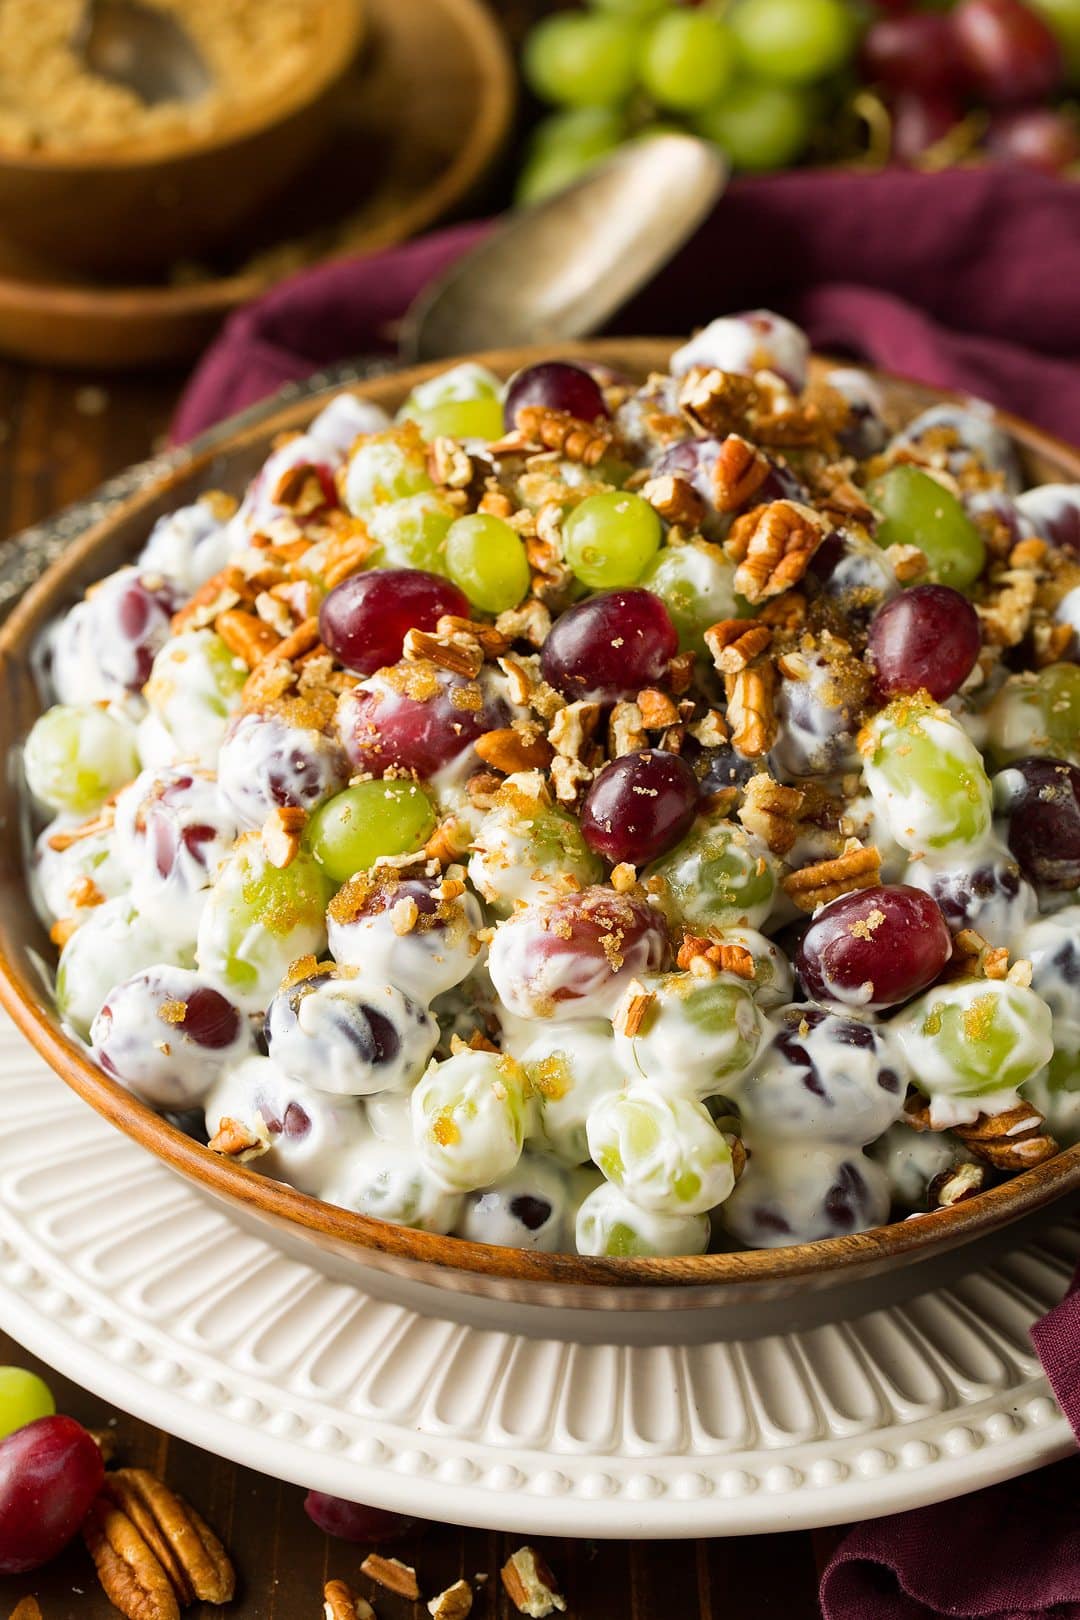 Grape salad toss with a cream cheese dressing and pecans. Served in a wooden bowl over a white scalloped plate.